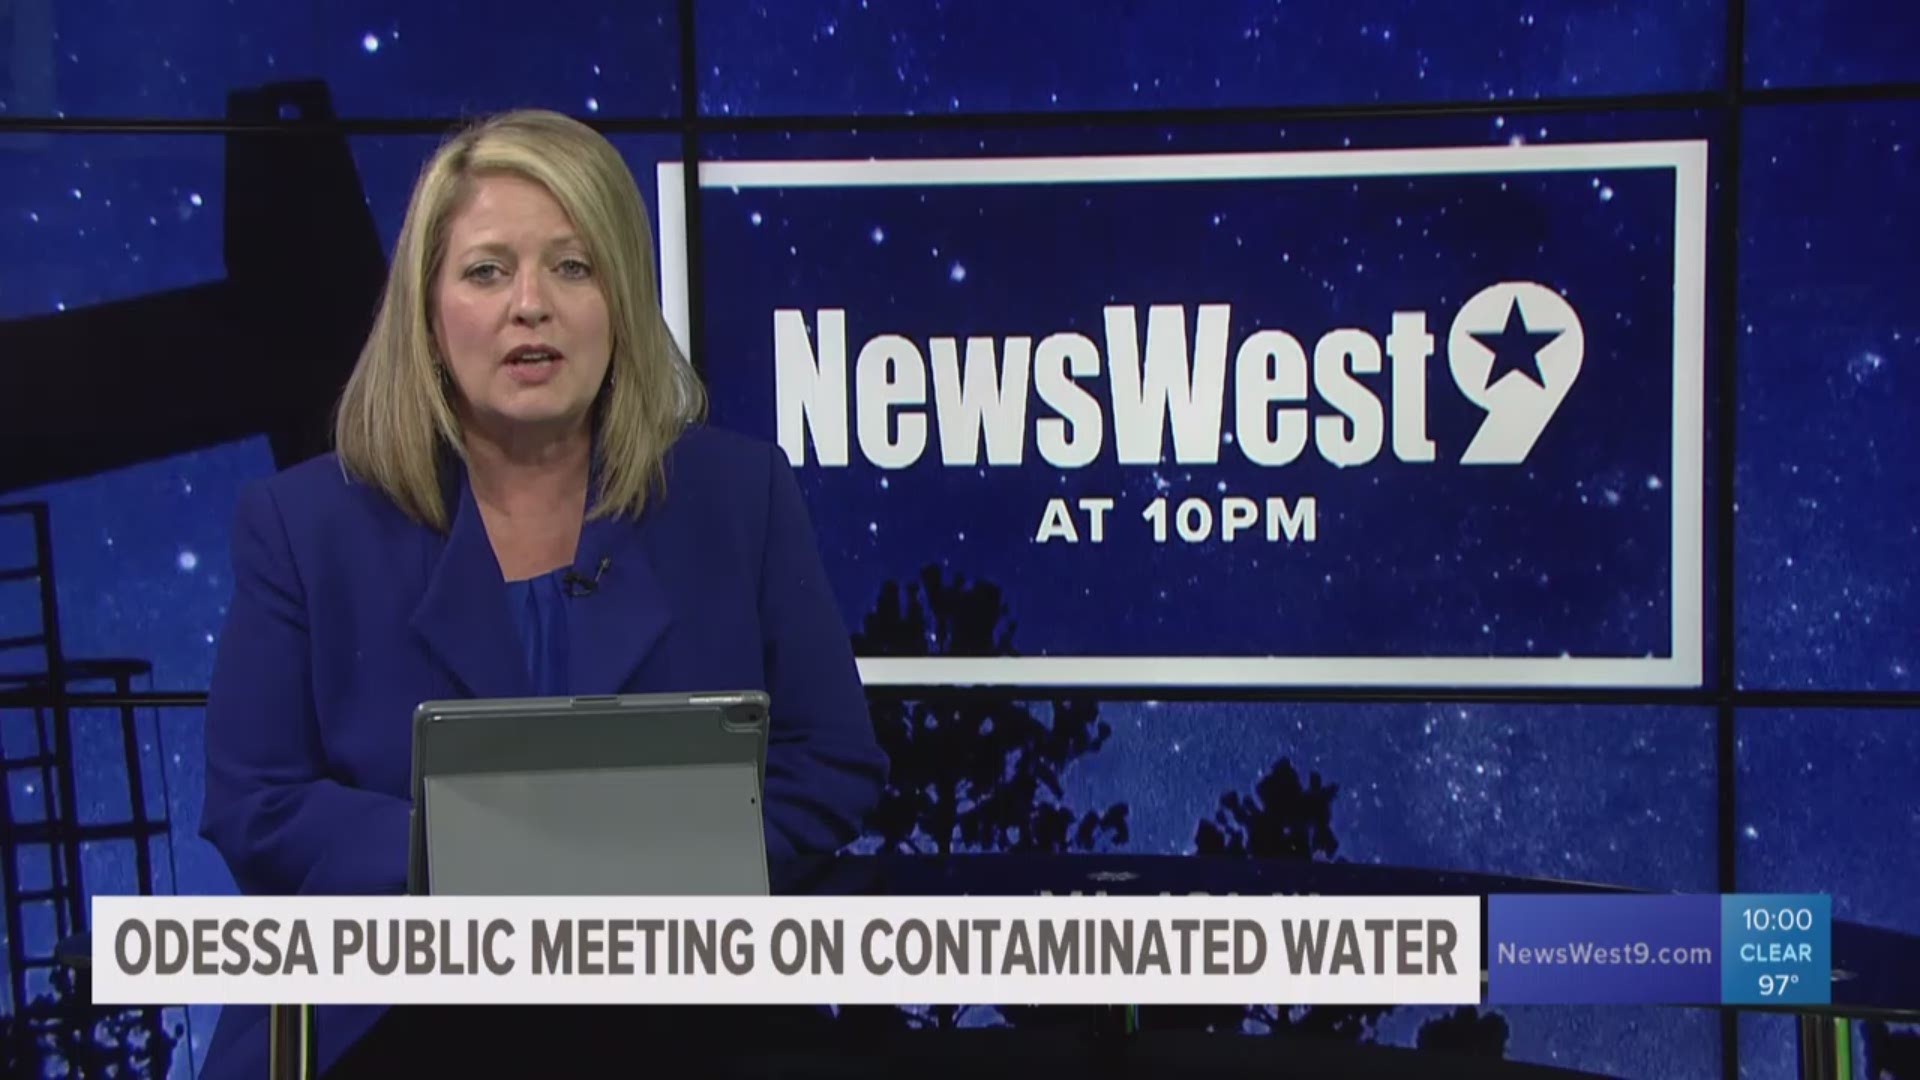 The city says the contamination does not impact the  city's water source but will be holding two hearings for citizens to voice their concerns.